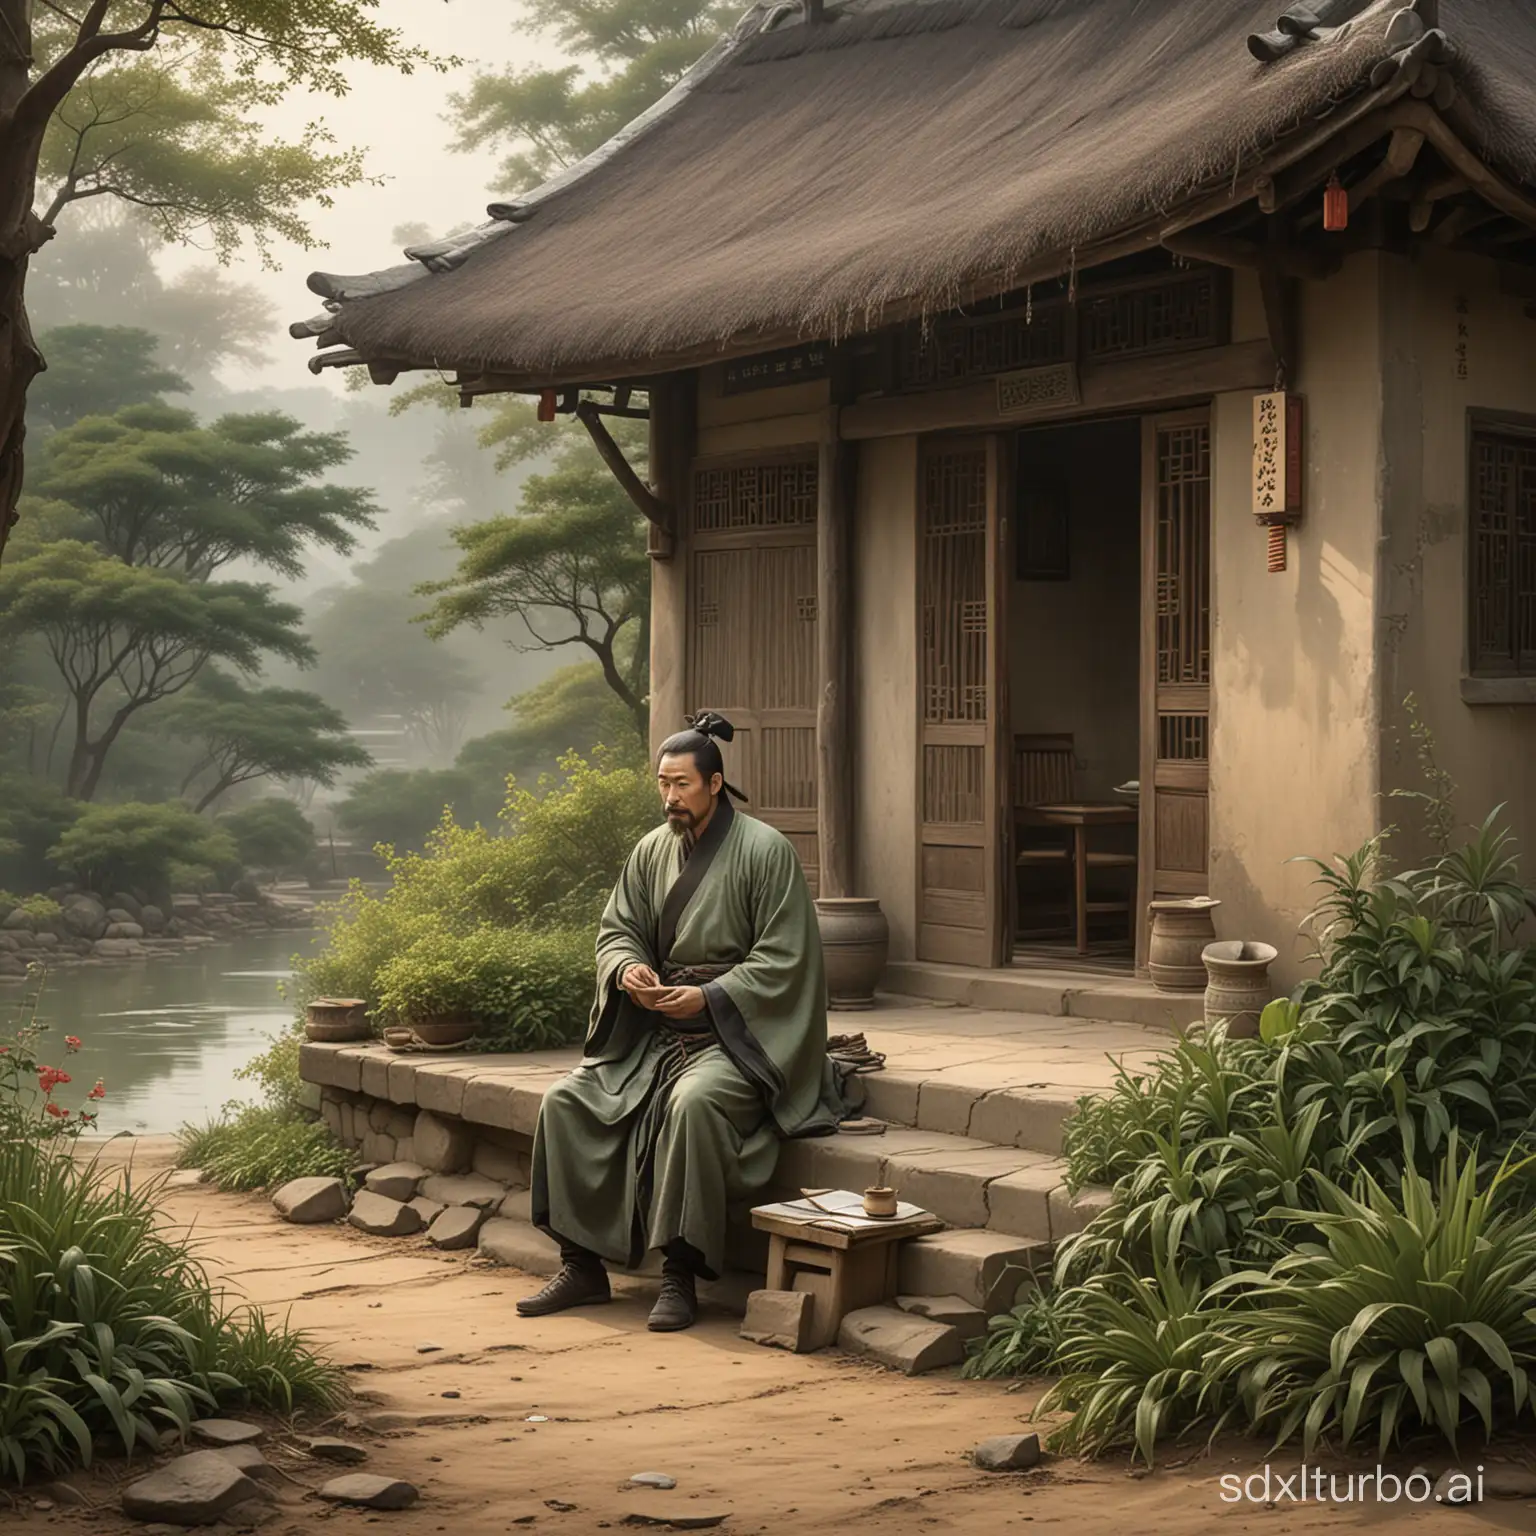 Liu Bei contemplated three times before the thatched cottage, intending to humbly accept others' words and sincerely seek learning, with his goal set in the external world to pursue, so as to perceive others' responses.